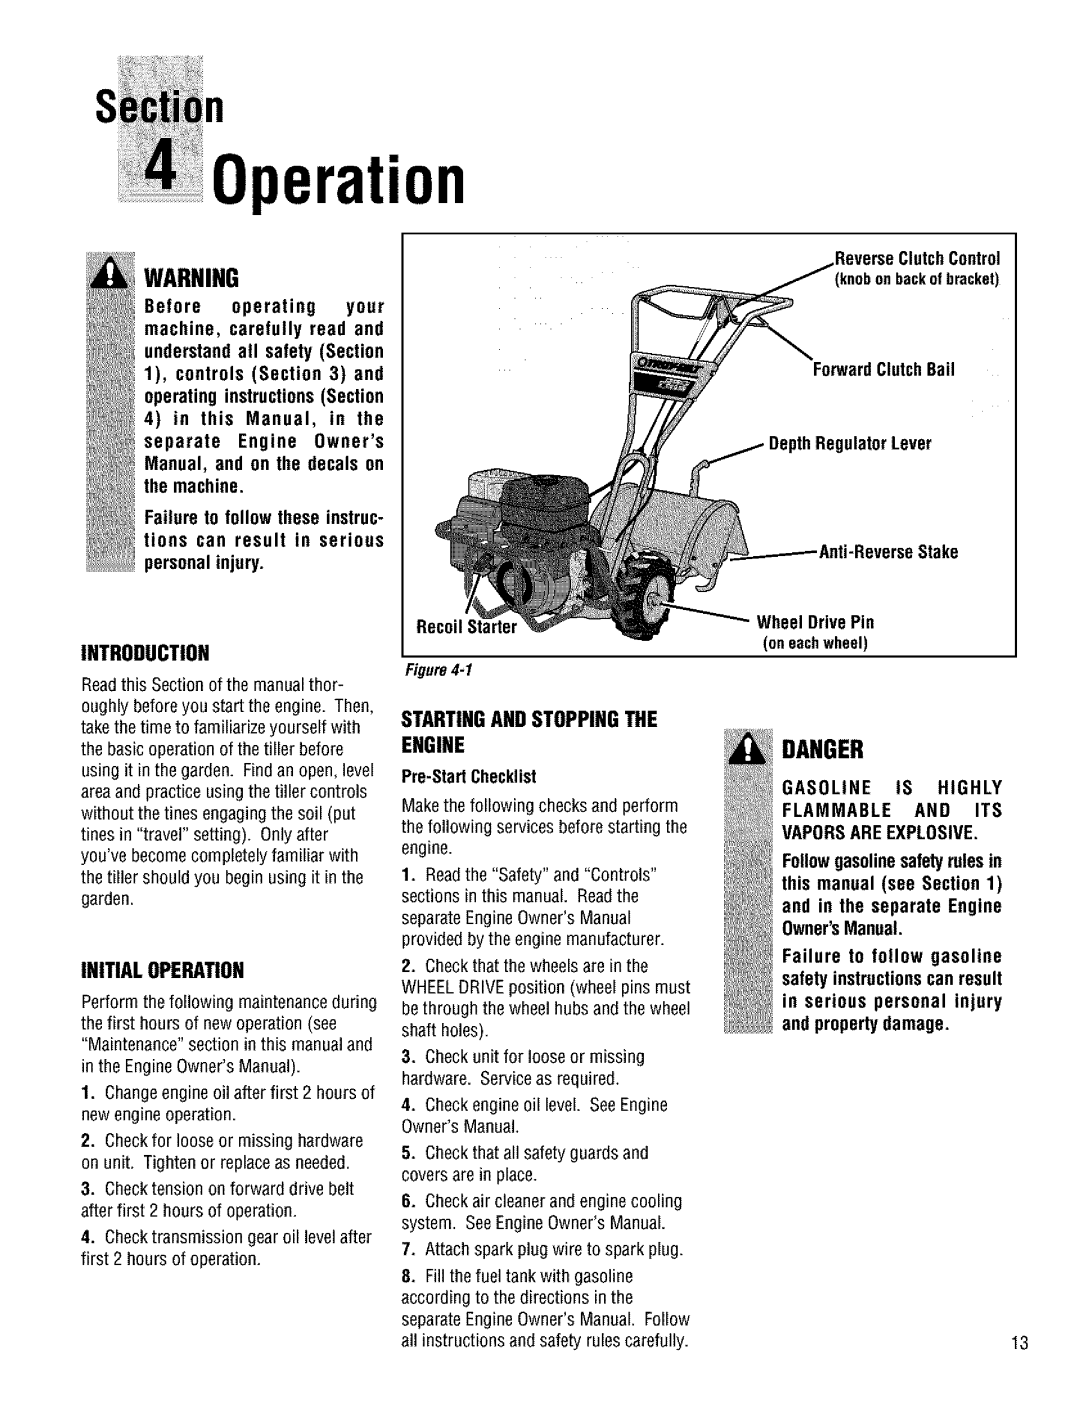 Troy-Bilt 644H manual Danger, Introduction, Initial Operation, Startingand Stoppingthe Engine, 1 